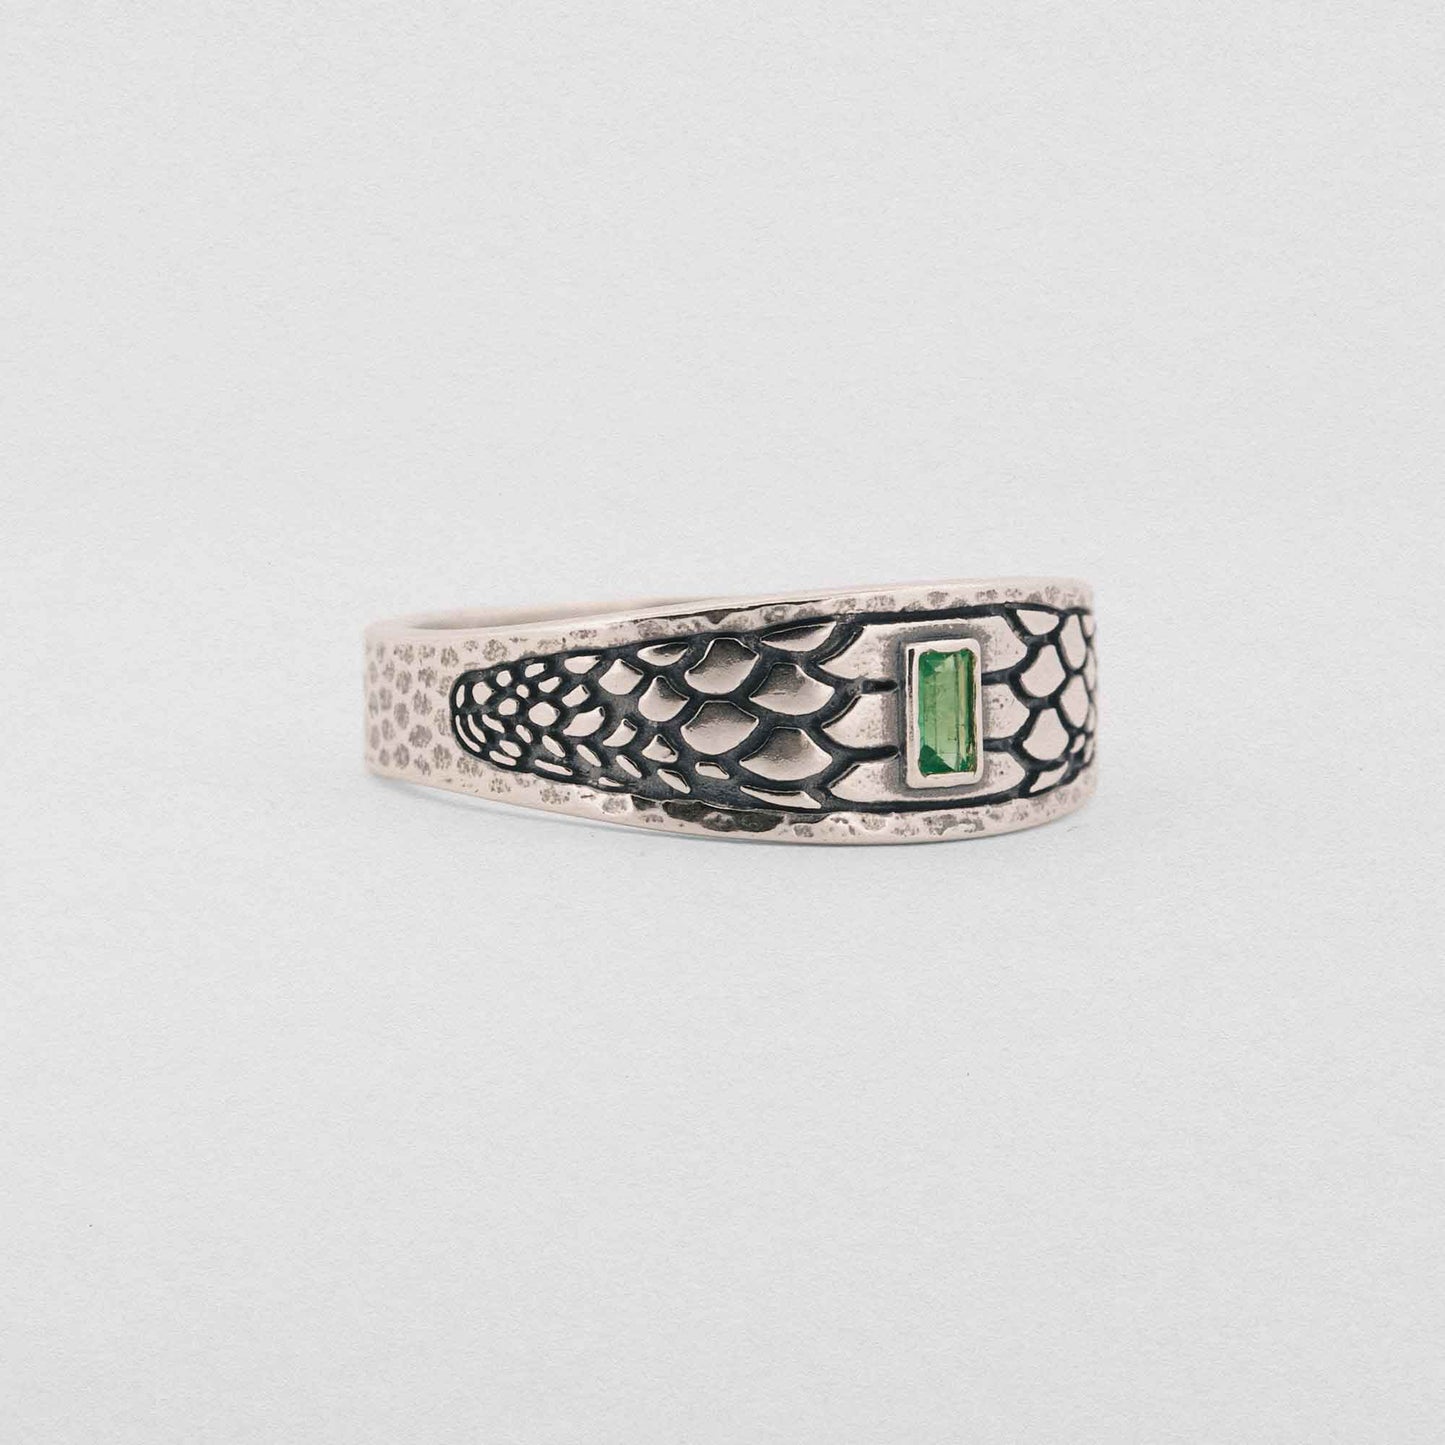 Snake skin engraving and an emerald stone set in a 925 silver ring